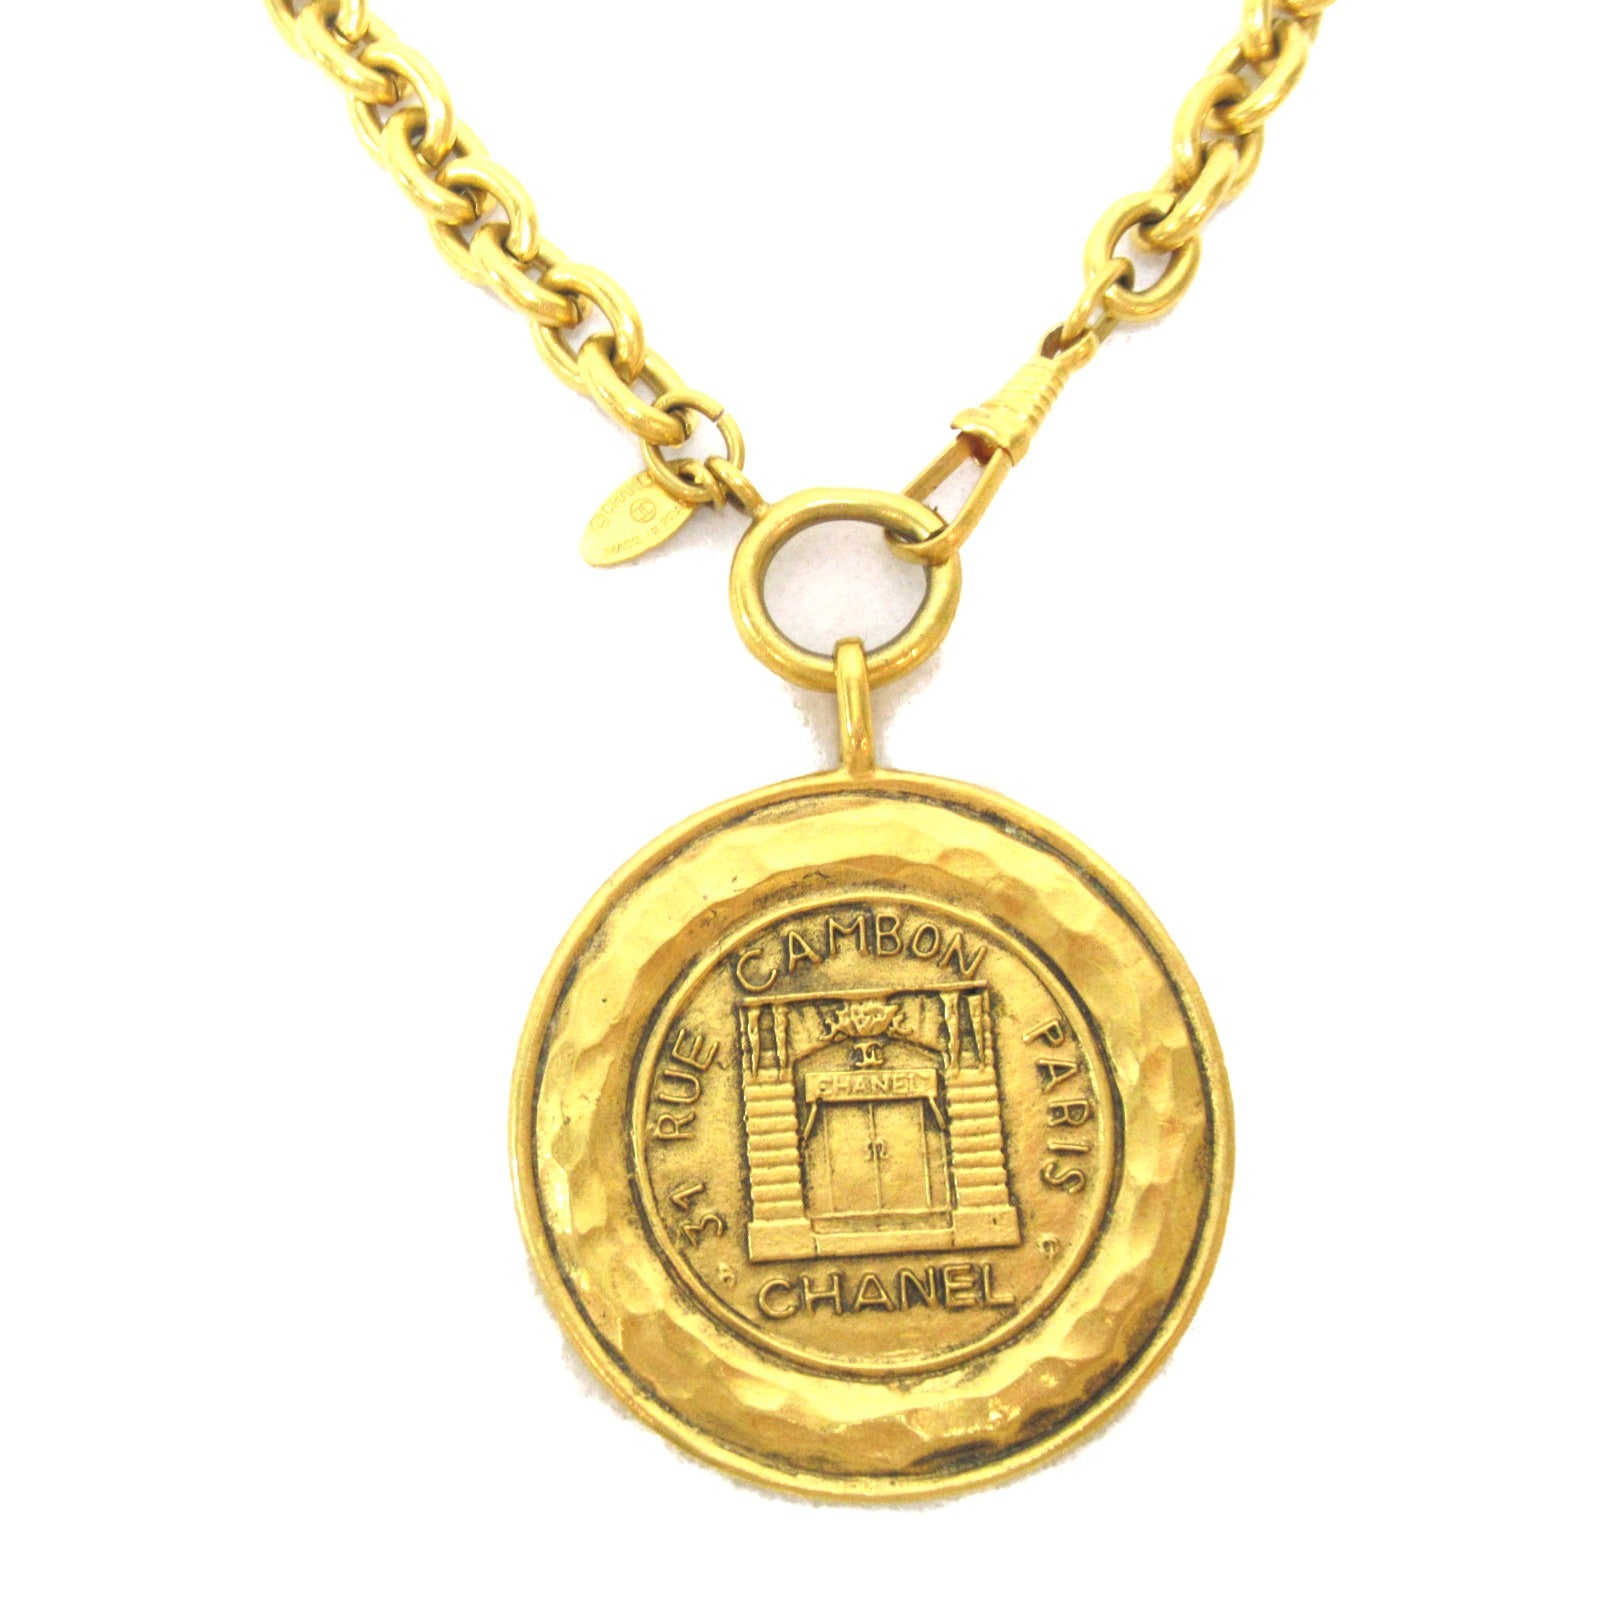 CHANEL Medal Necklace Collar Jewelry GP (Gen )  Gold